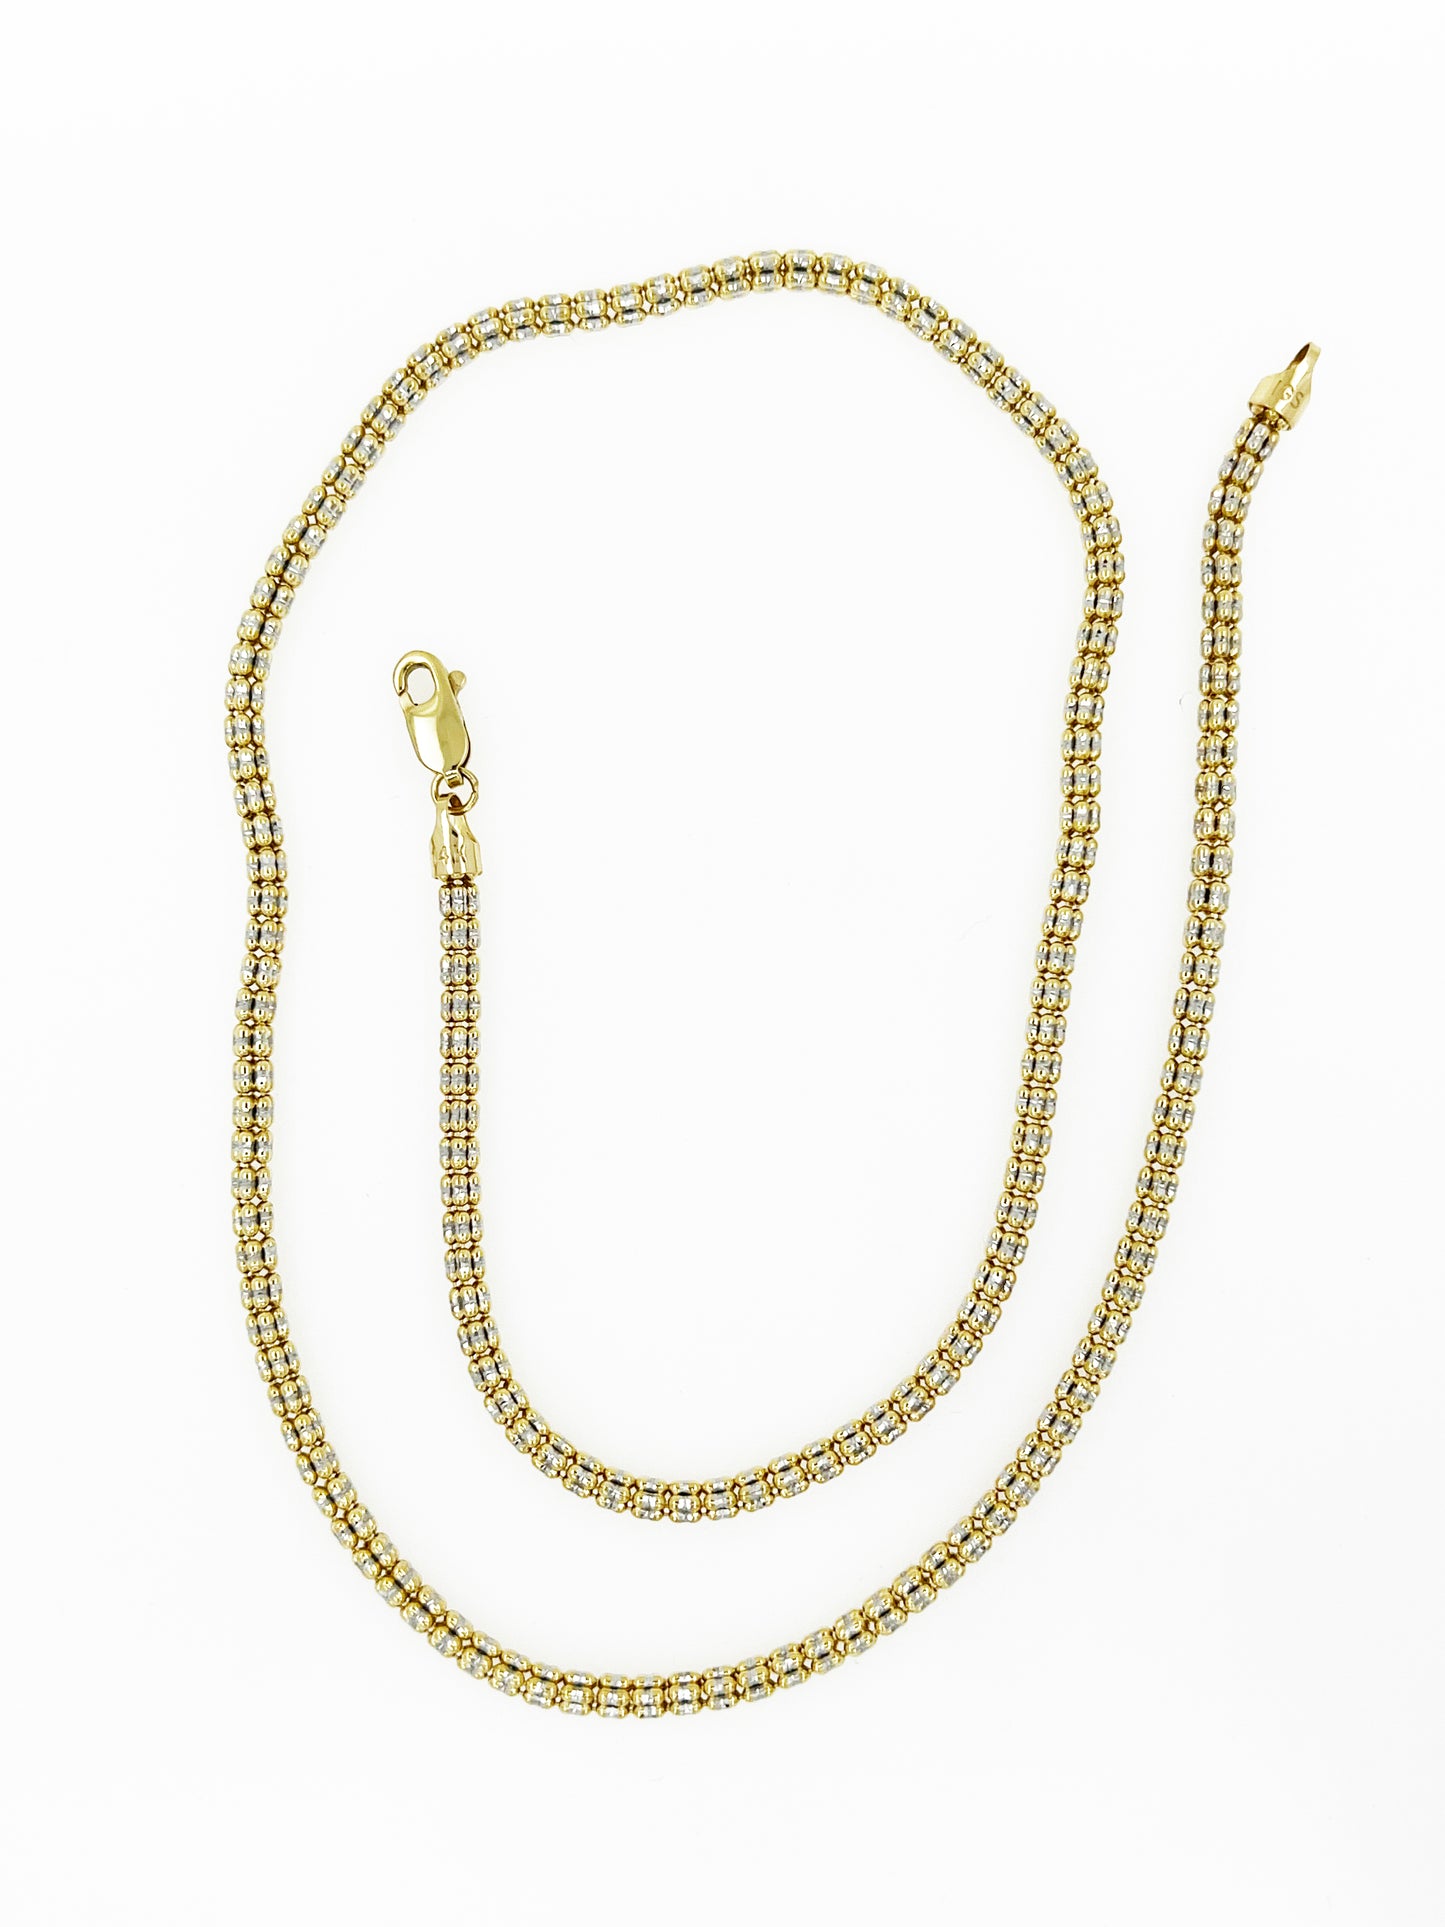 3.3mm Sparkle Ice Link Chain in 14k Gold (20")